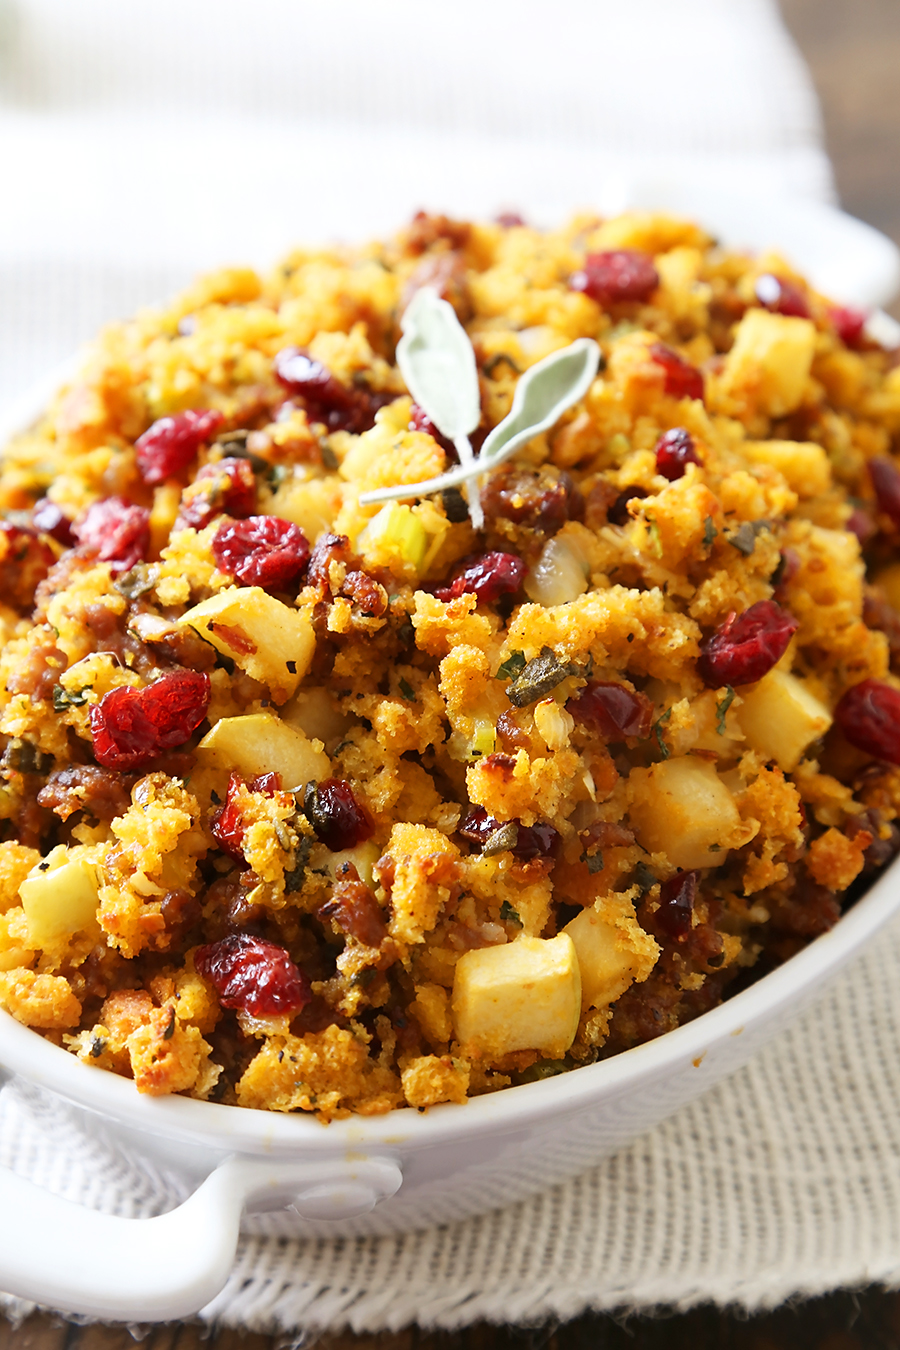 Sausage, Apple and Cranberry Cornbread Stuffing - This savory, delicious stuffing is my all-time favorite comfort food. It's a MUST for Thanksgiving + easy weeknight sides! thecomfortofcooking.com